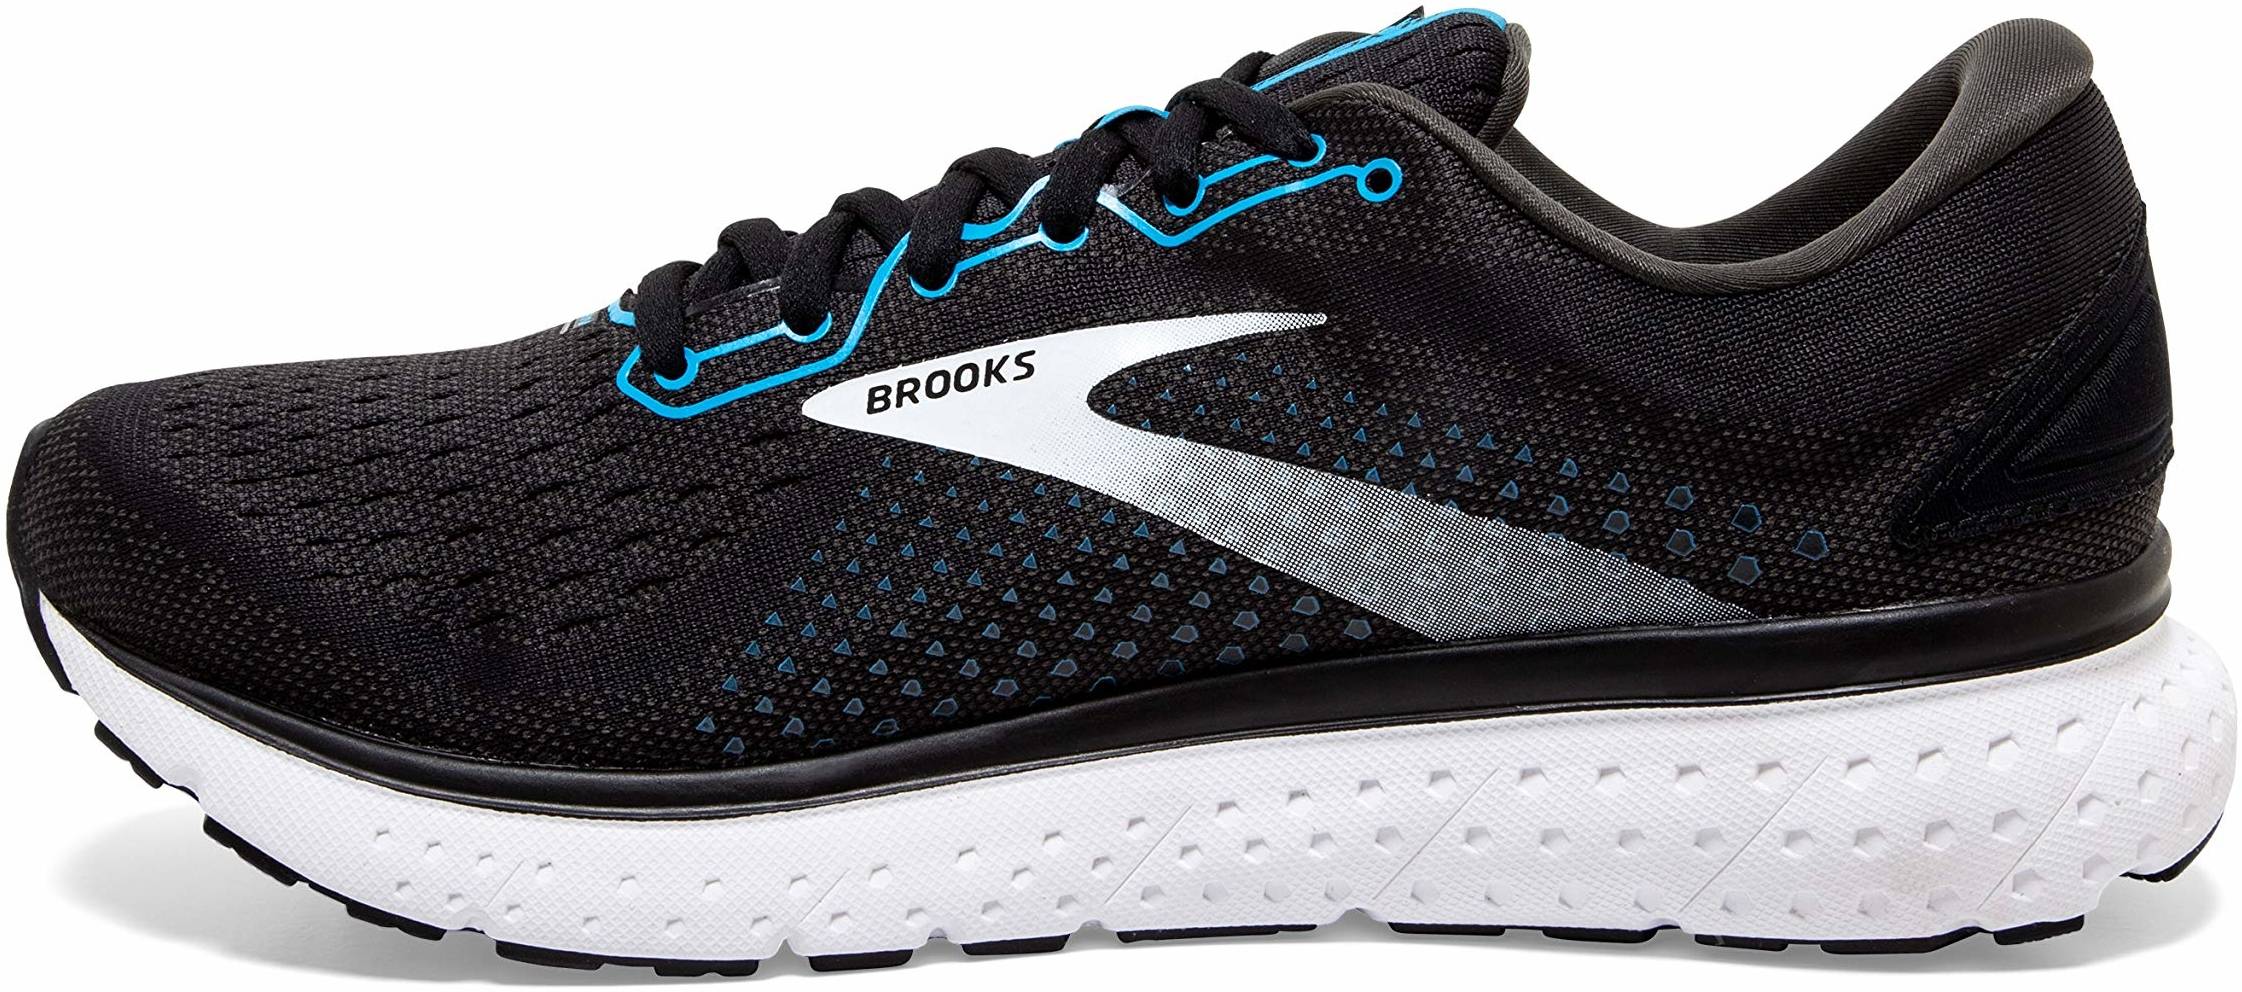 Save 13% on Wide Brooks Running Shoes 